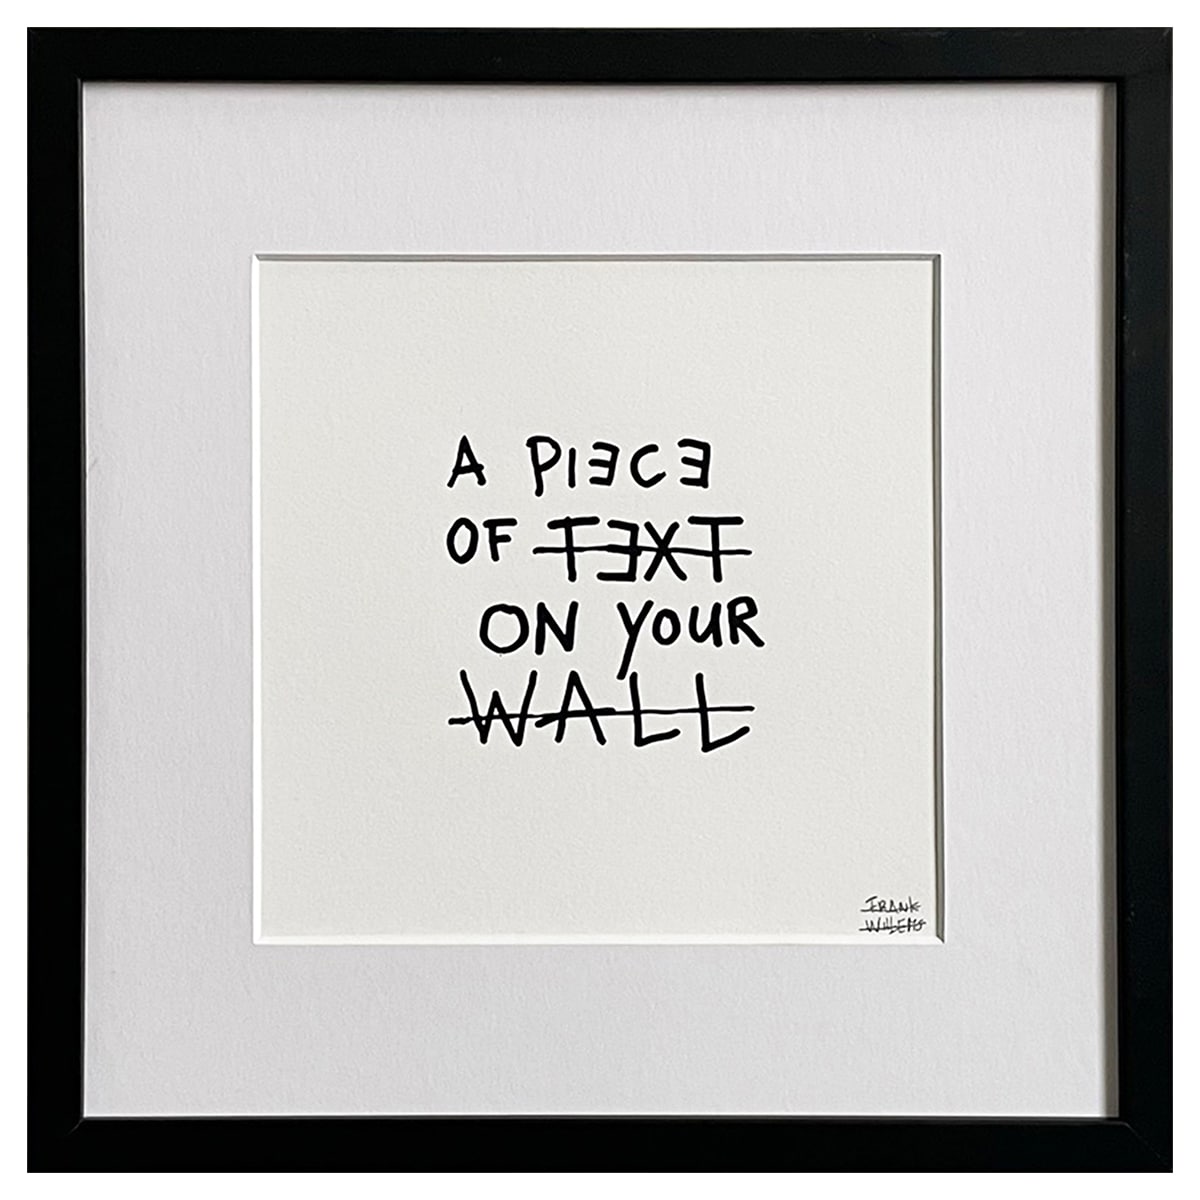 A PIECE OF TEXT ON YOUR WALL - Frank Willems